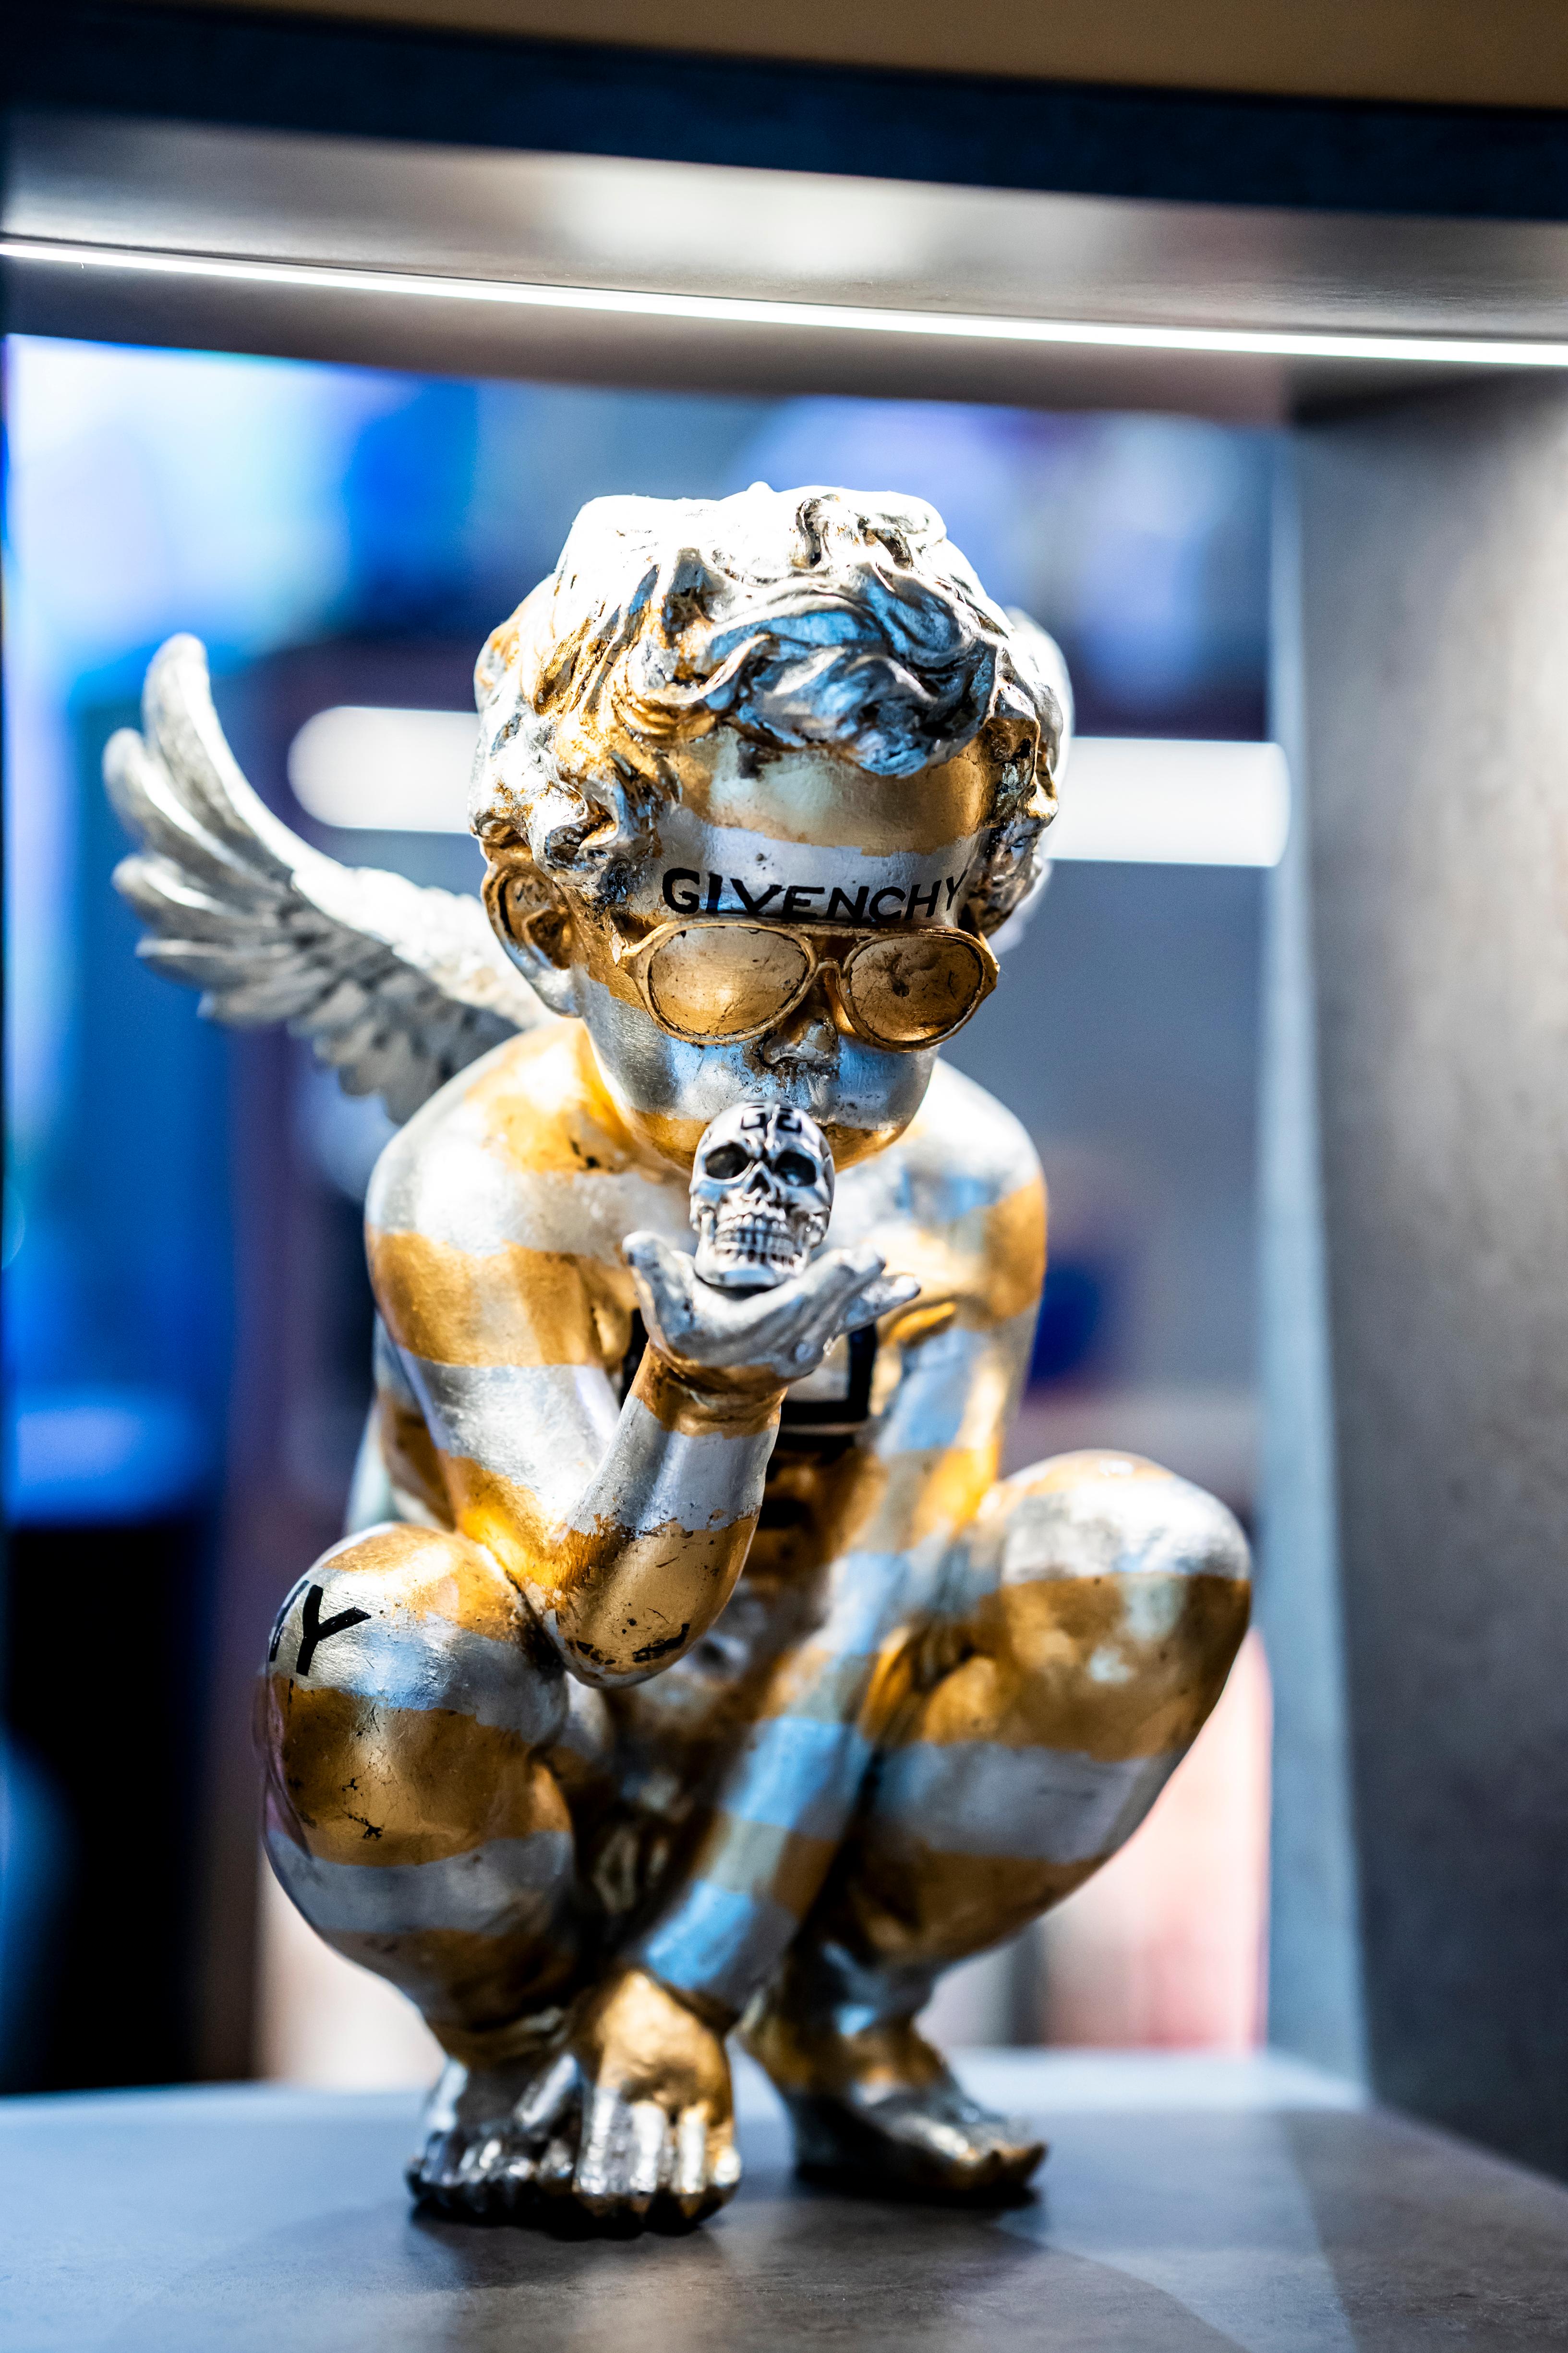 jimmie martin Figurative Sculpture - Gold and Silver GIV “Naughty Angel”